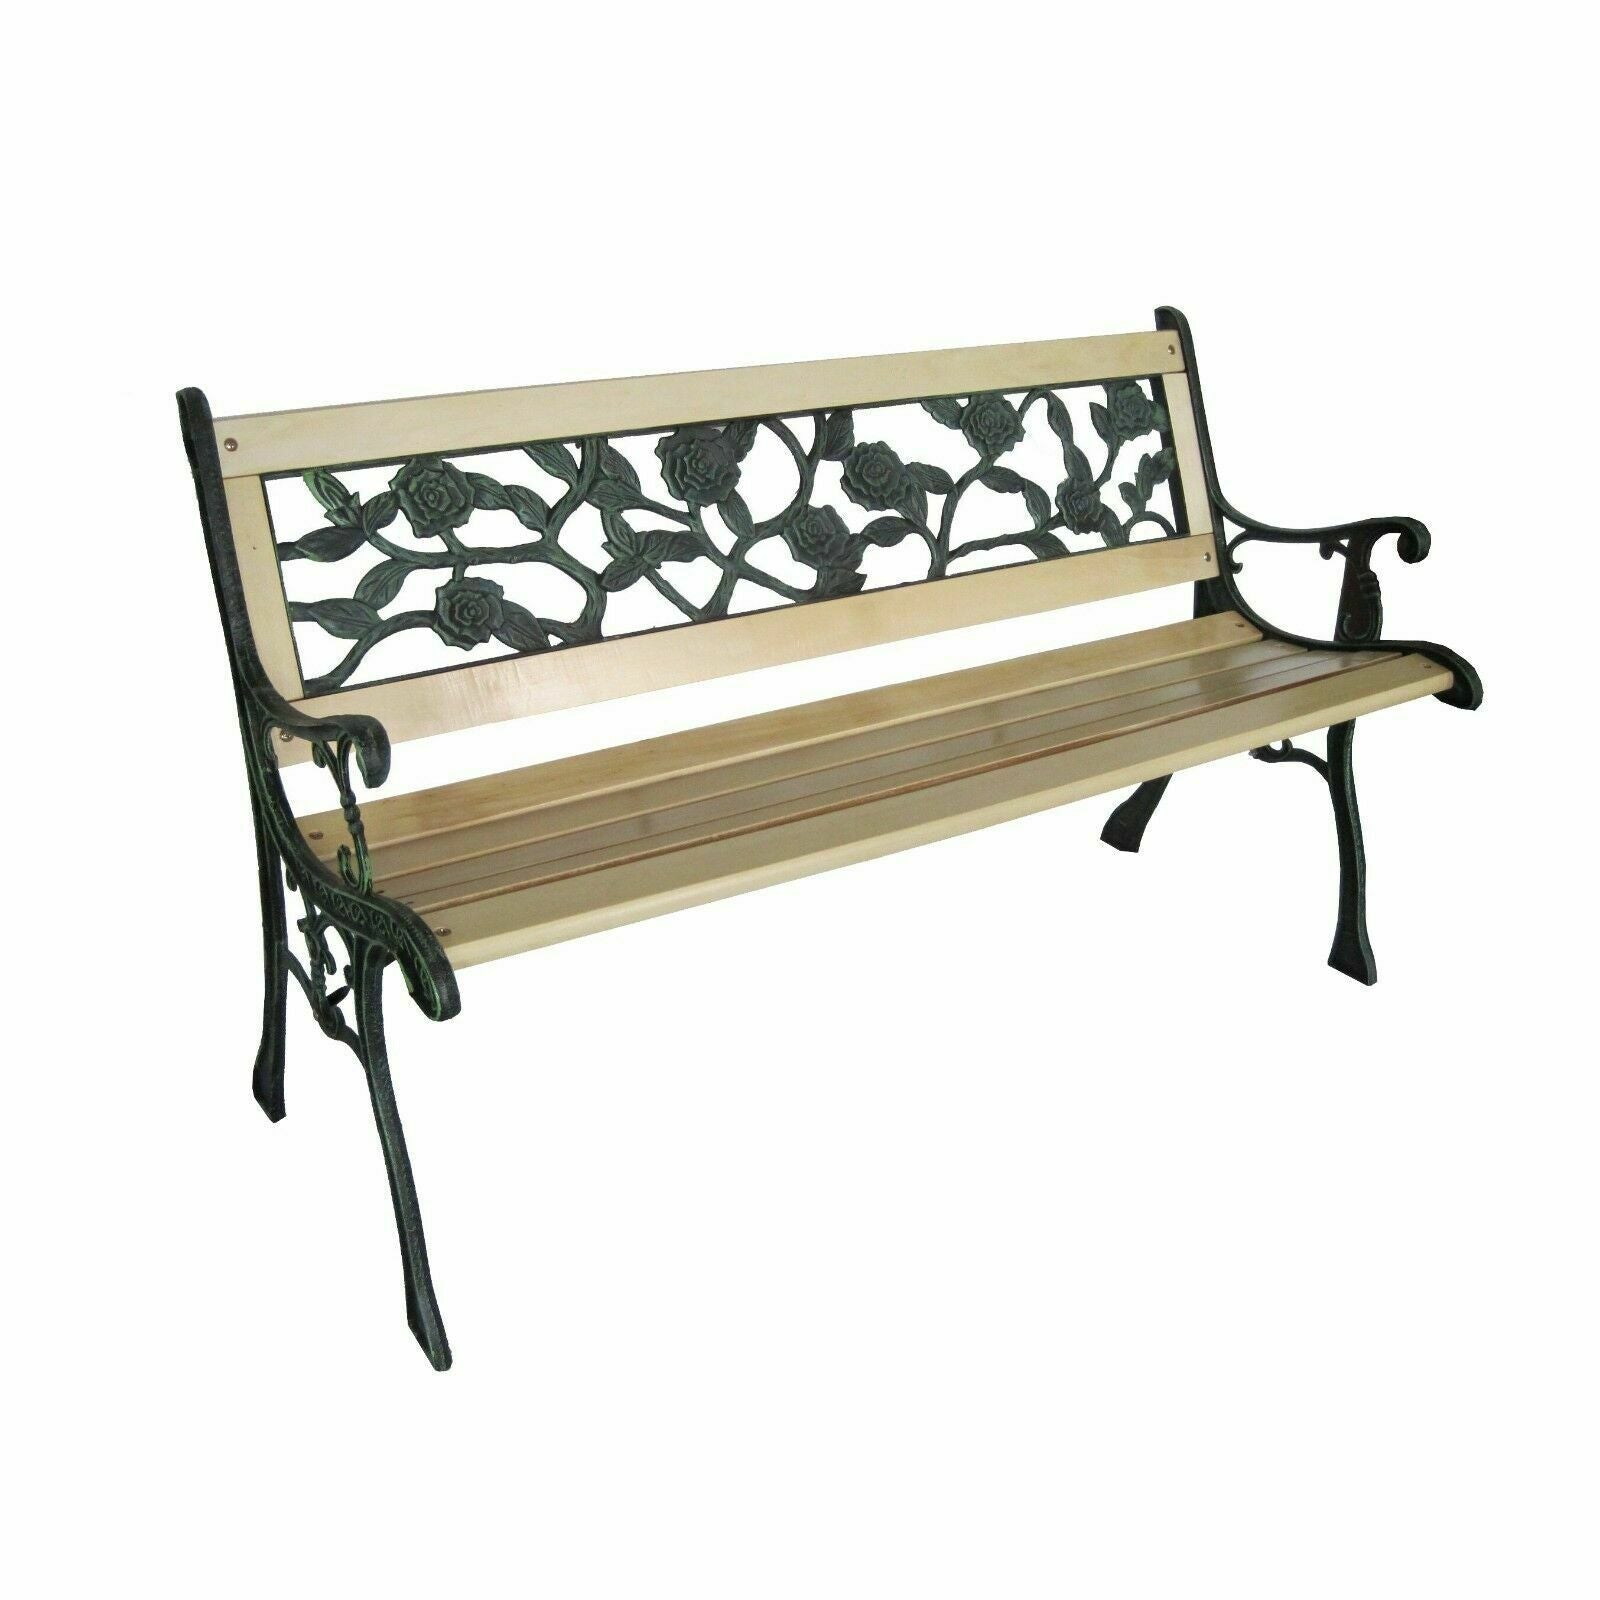 Outdoor Wooden Bench Rose Design 3 Seater Garden Bench Park Seat With iron Legs